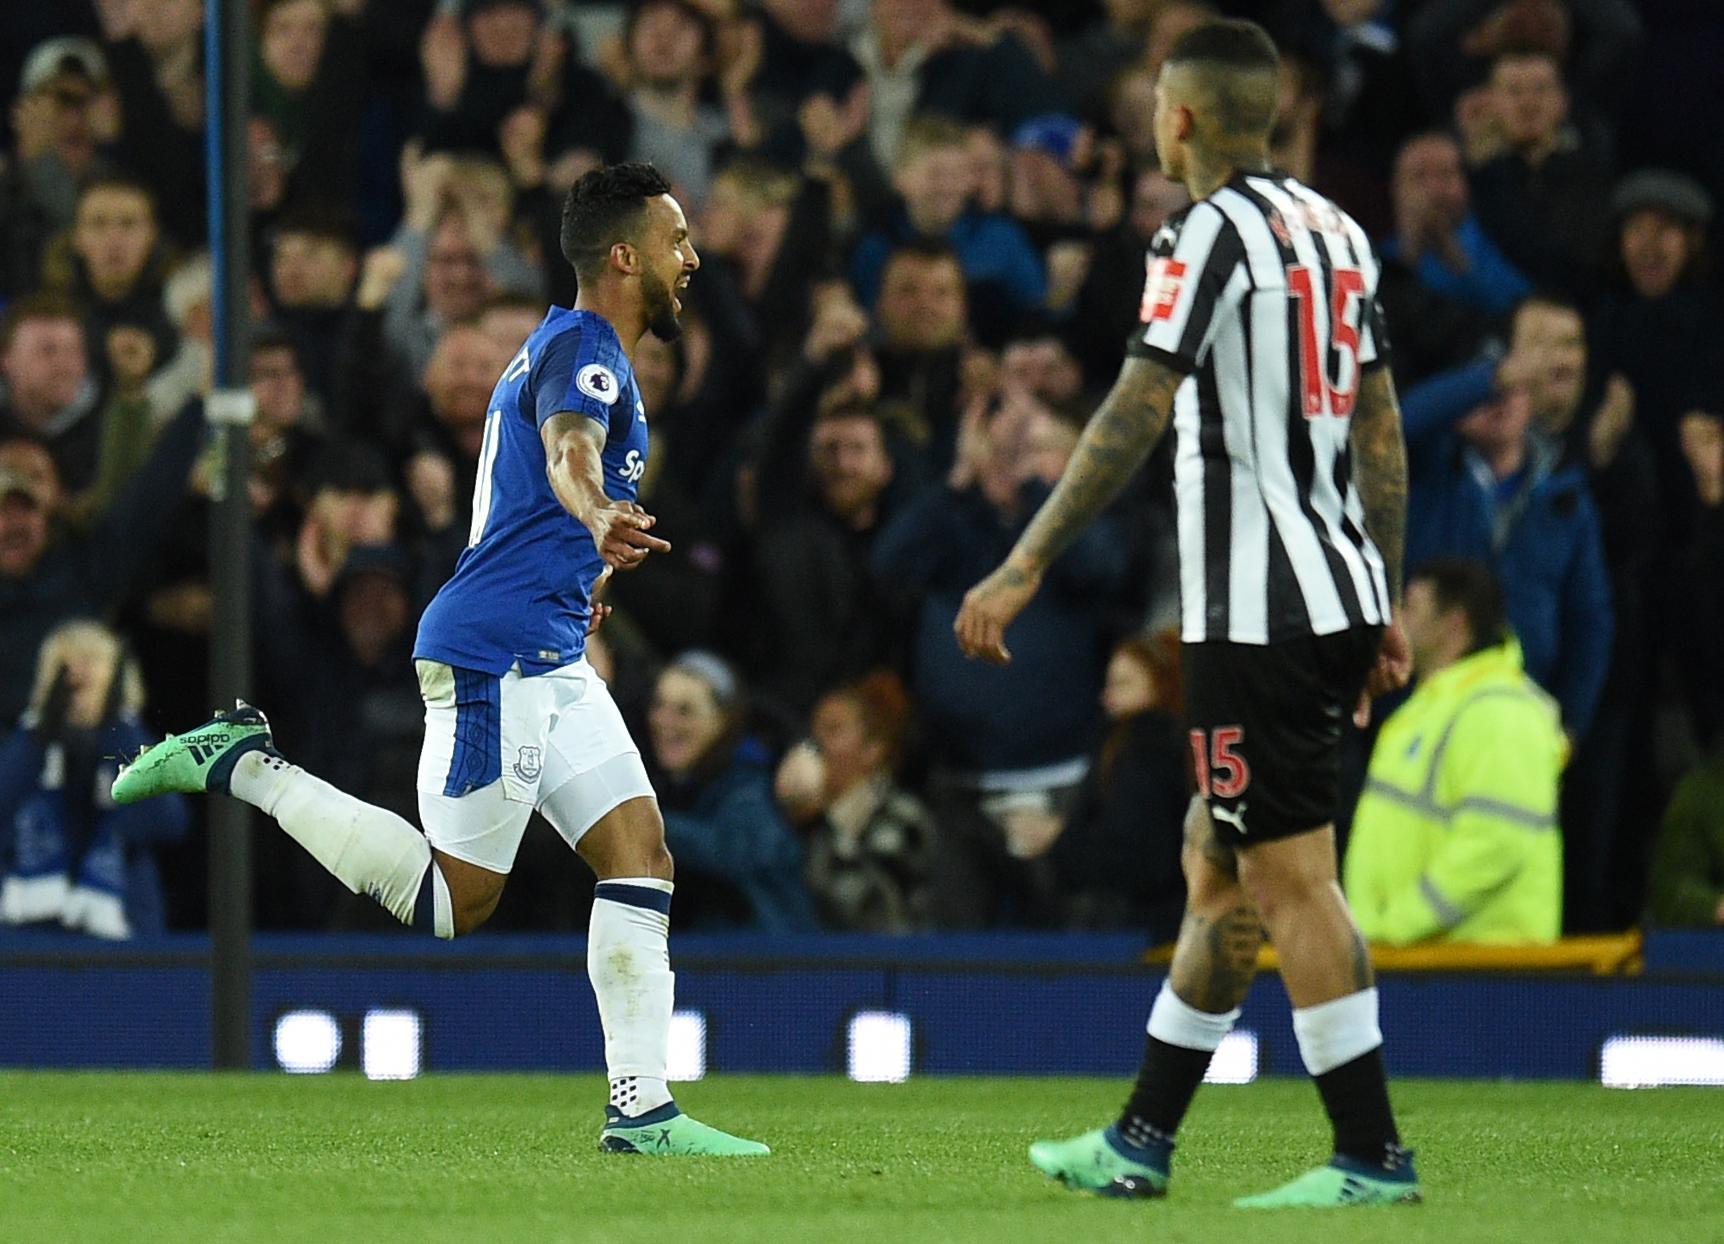 Theo Walcott fires winner to offer Everton some respite and bring Newcastle&apos;s purple patch to an end